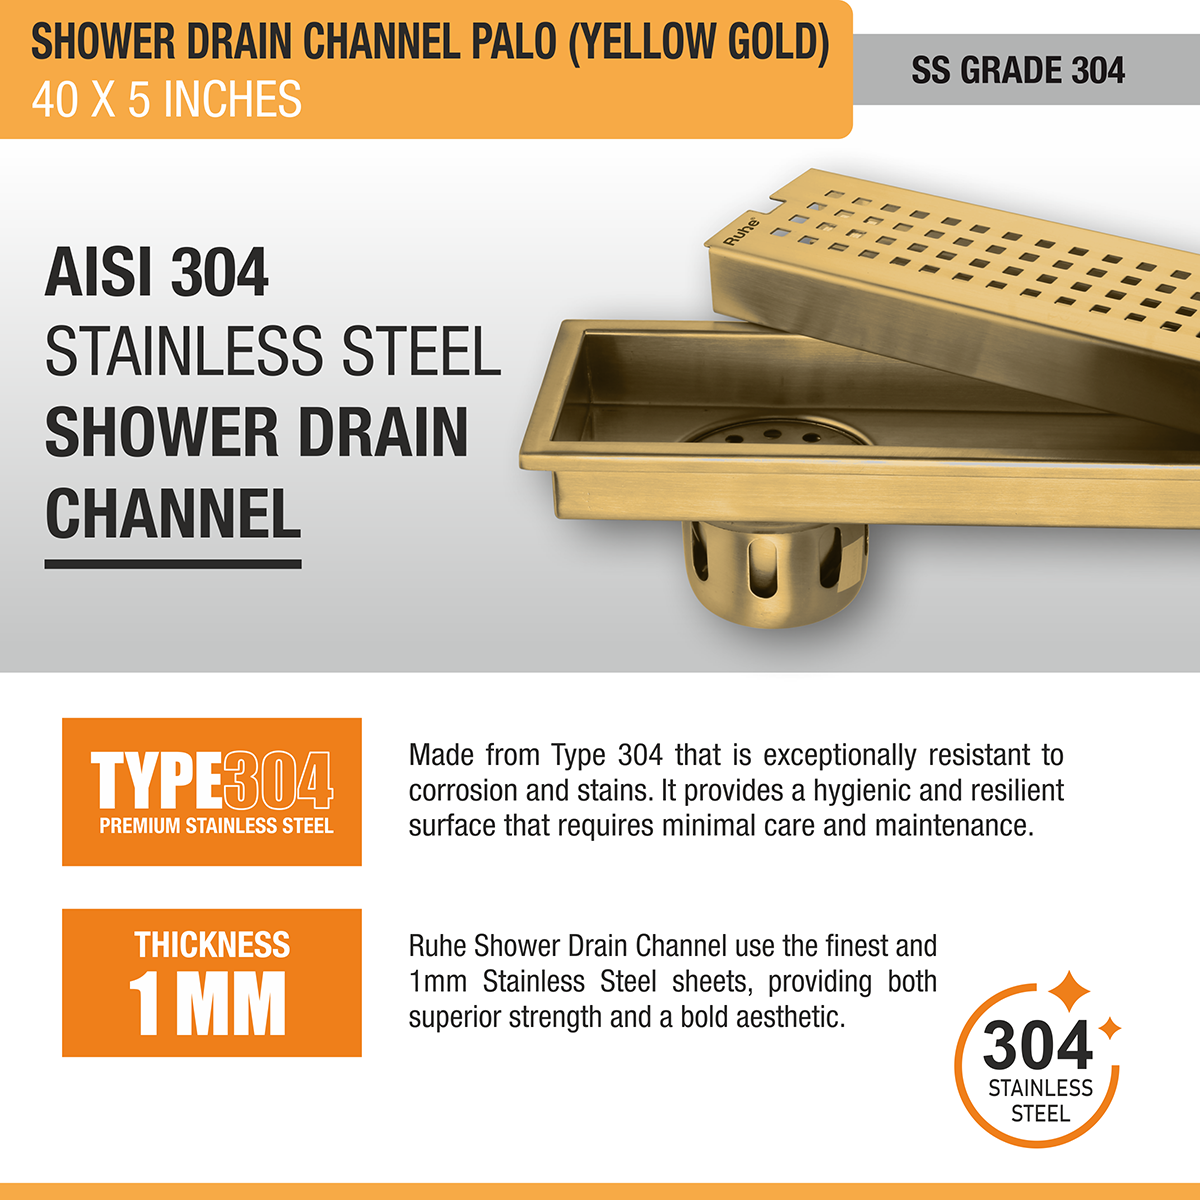 Palo Shower Drain Channel (40 x 5 Inches) YELLOW GOLD stainless steel